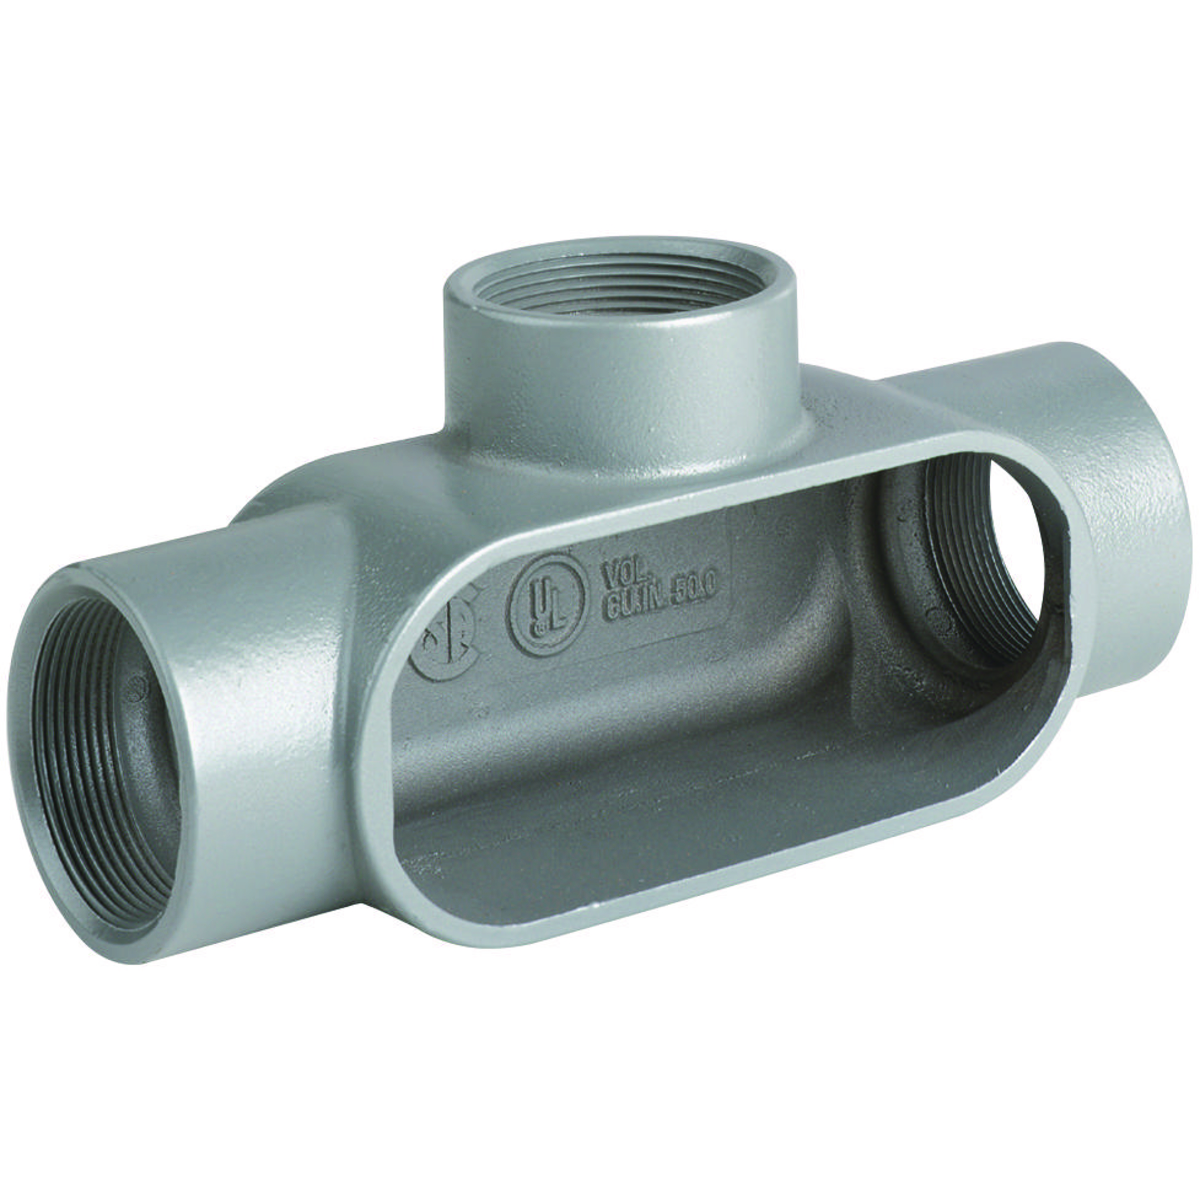 DURALOY 7 SERIES - IRON CONDUIT BODY - T TYPE - HUB SIZE 3/4 INCH -VOLUME 9.5 CUBIC INCHES